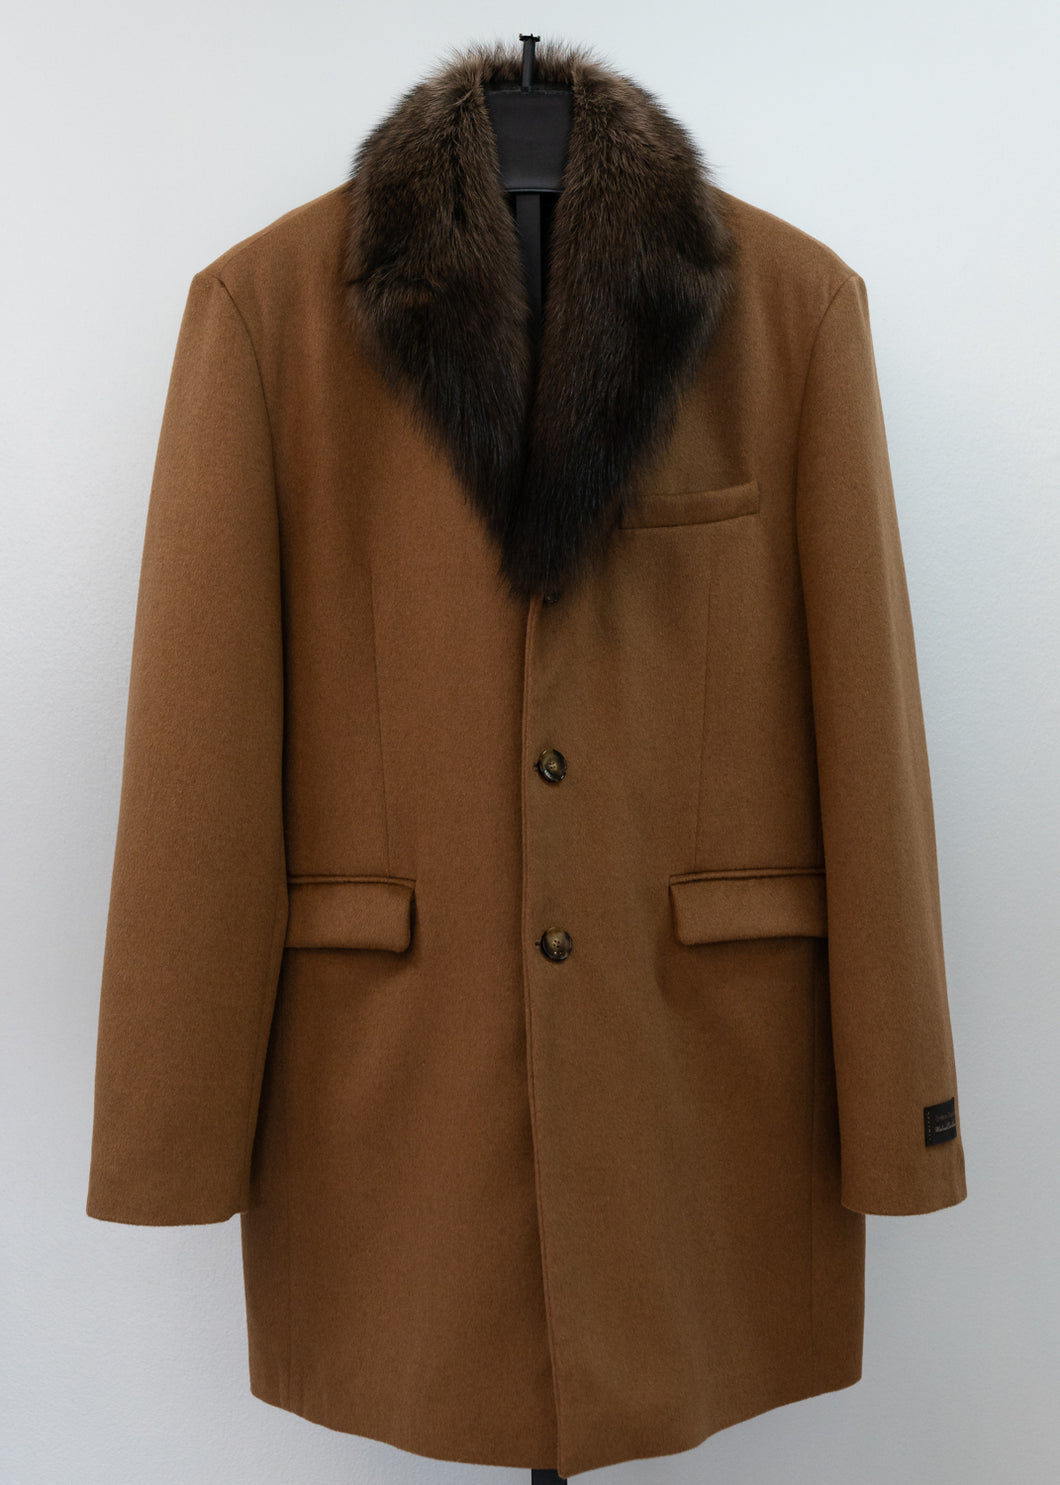 Men's Wool/Cashmere 3/4 Coat With Fisher Collar